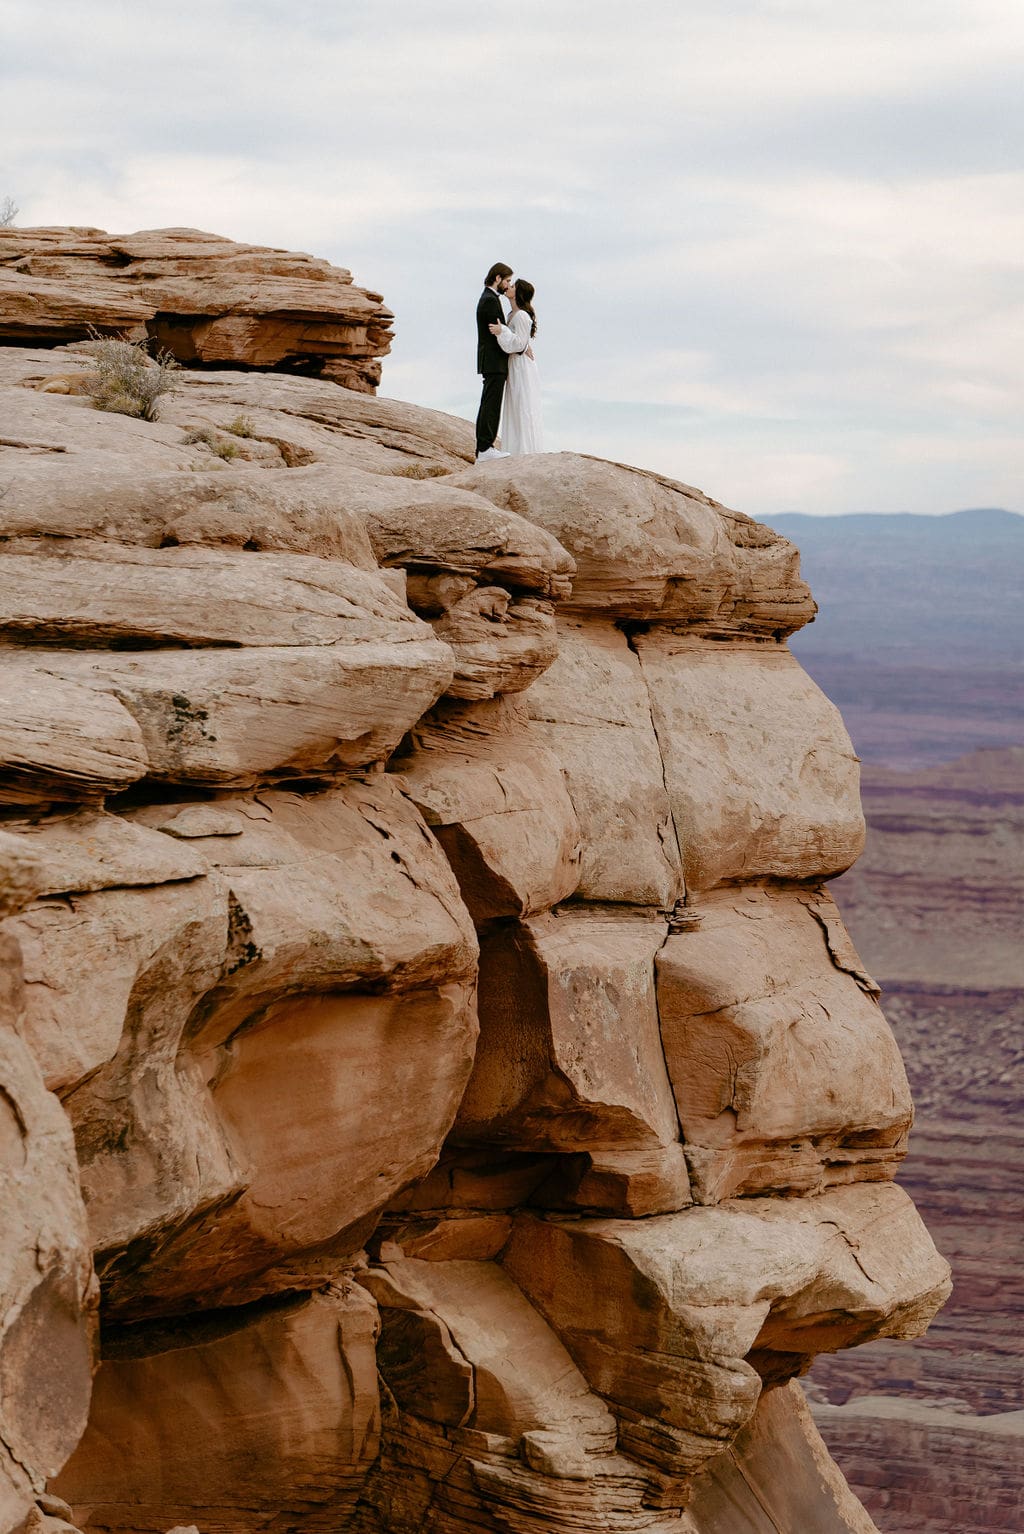 elope on the edge of a cliff